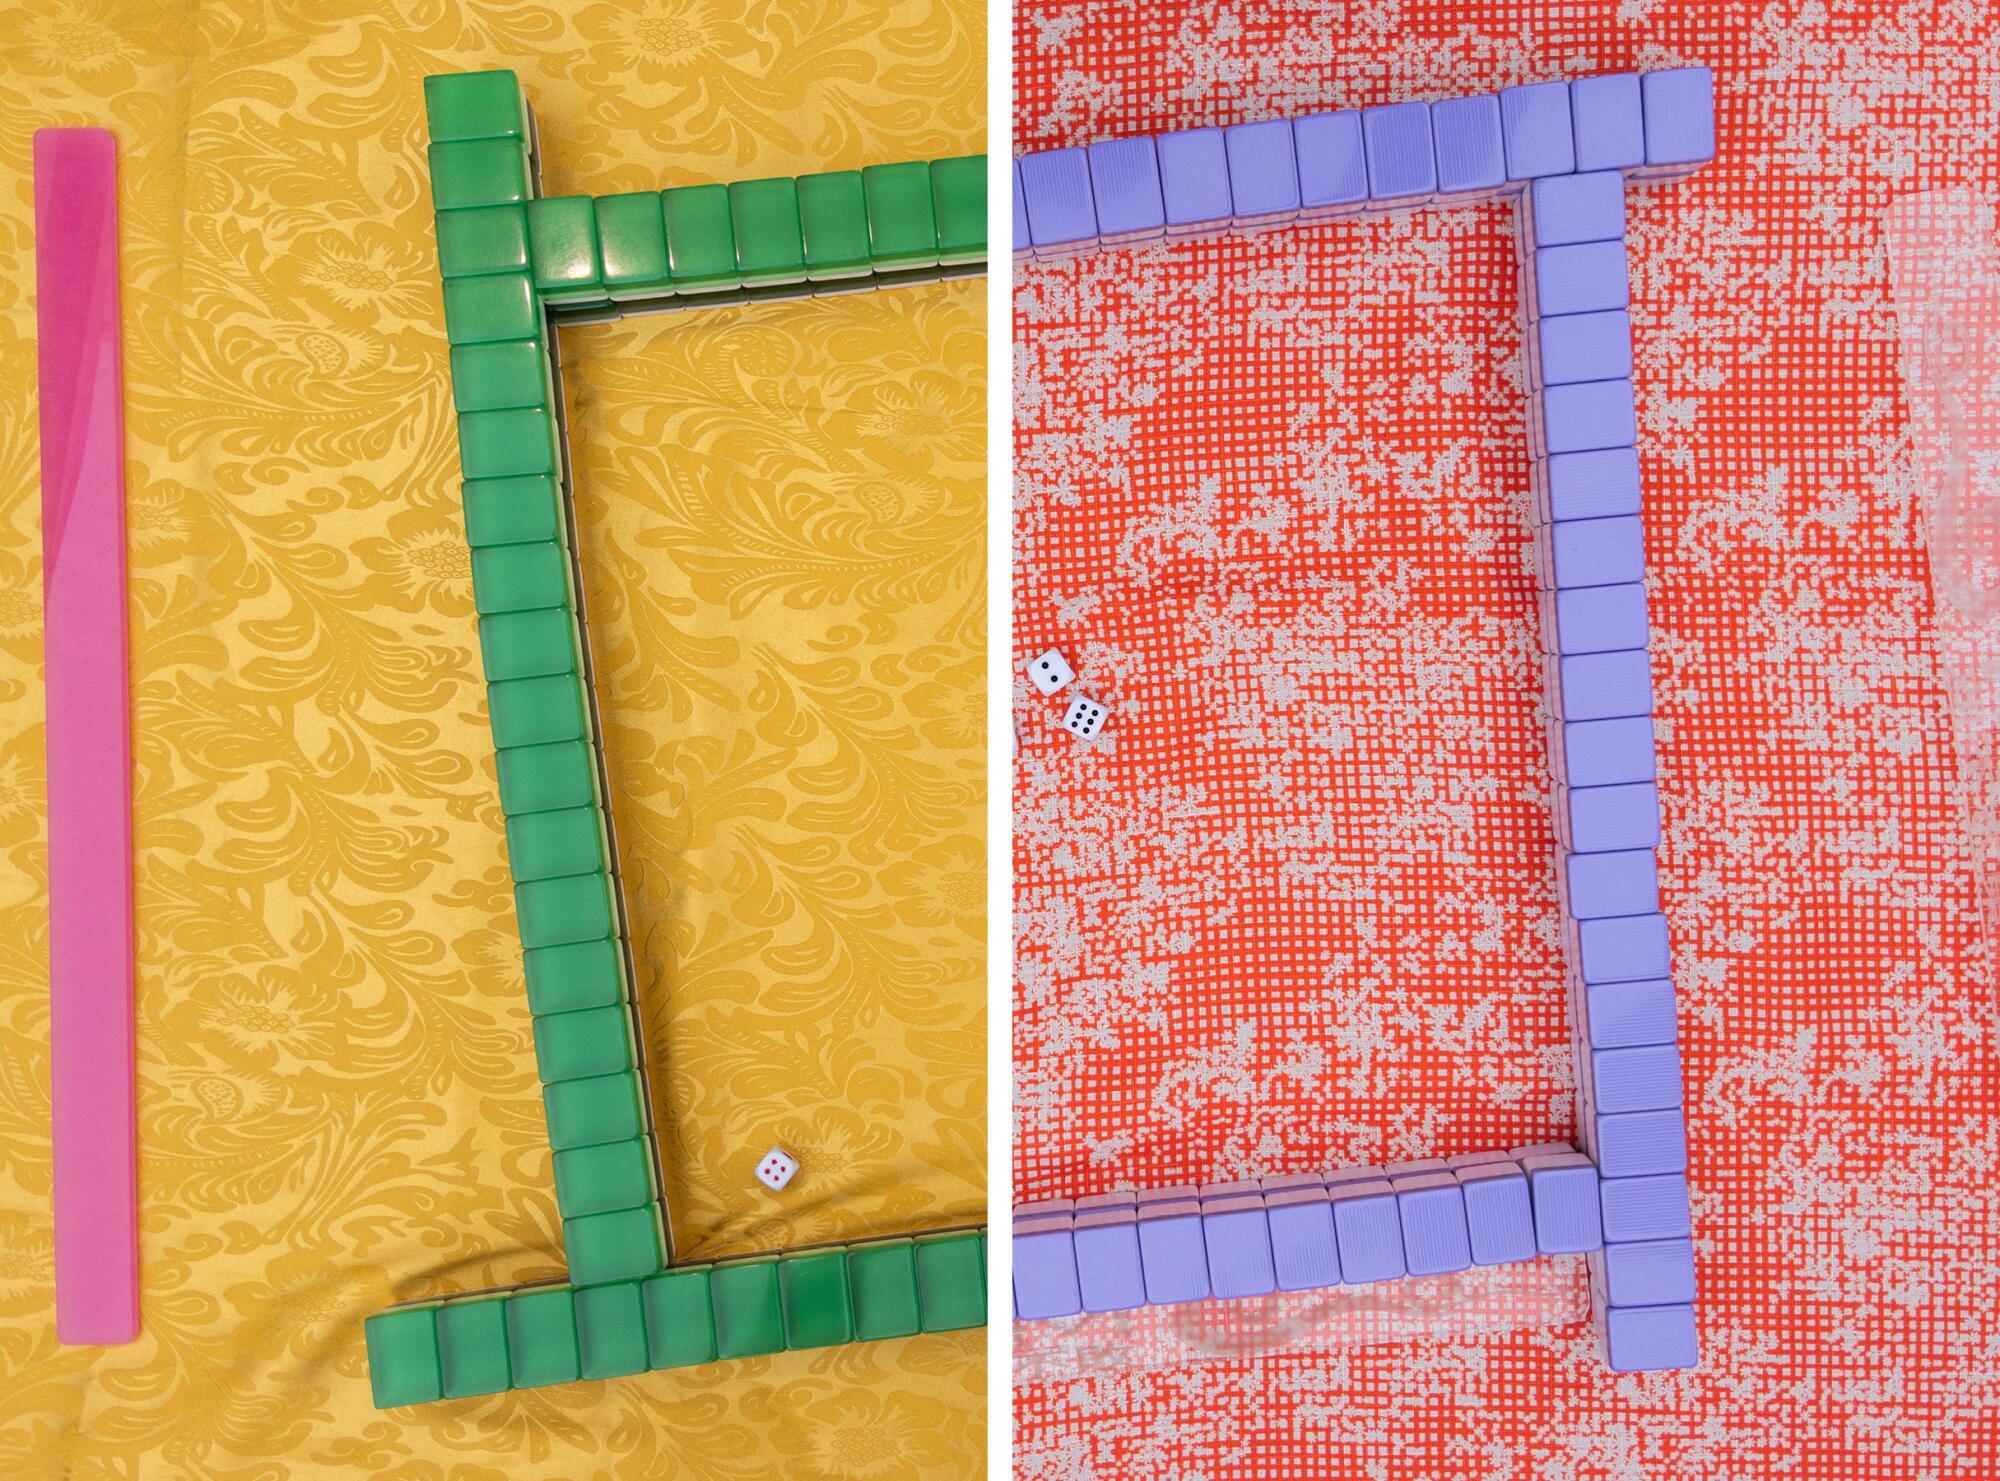 Mah-jongg tiles, on two different tables, ready for the next game.